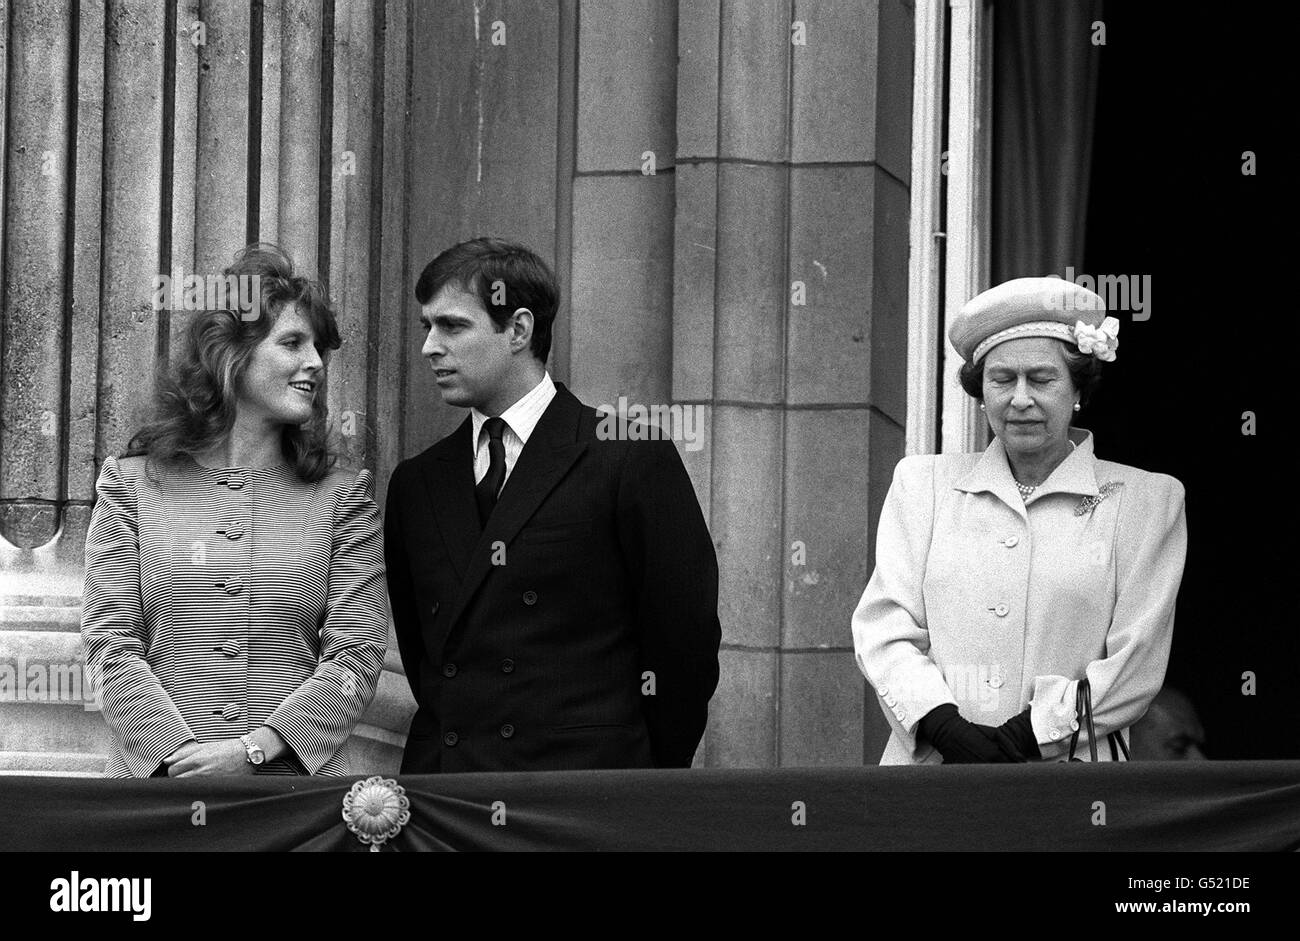 SARAH FERGUSON 1986: Prince Andrew (later the Duke of York) with his fiancee, Sarah Ferguson (later the Duchess of York) and his mother, the Queen, on the balcony of Buckingham Palace on the day of the Queen's 60th birthday. *The young couple listened to thousands of children singing to Her Majesty. Stock Photo